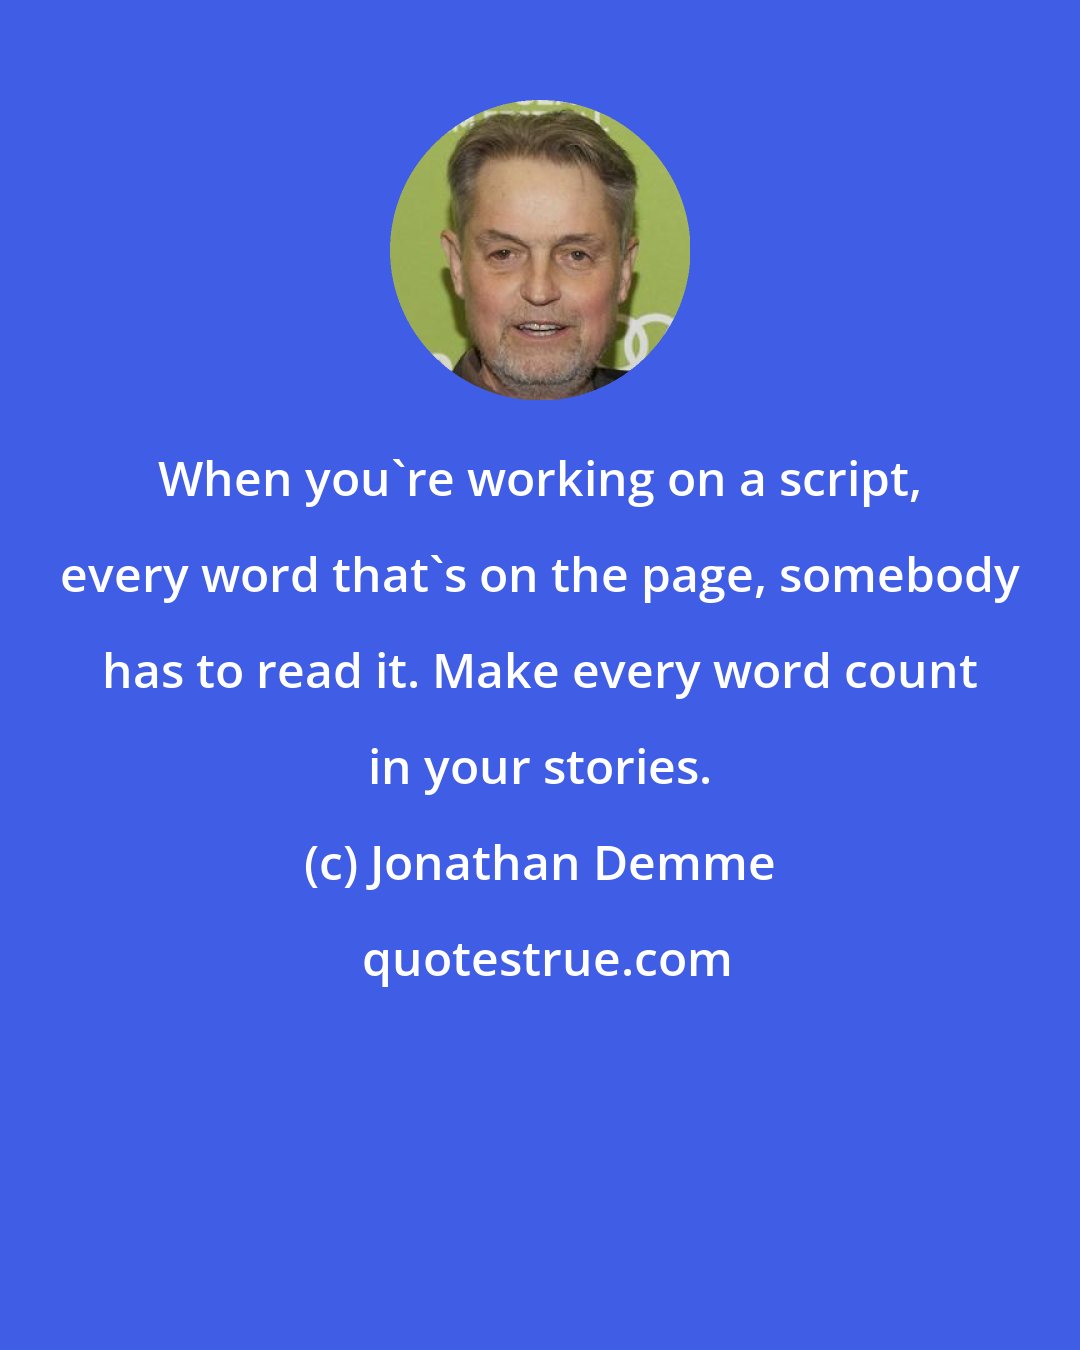 Jonathan Demme: When you're working on a script, every word that's on the page, somebody has to read it. Make every word count in your stories.